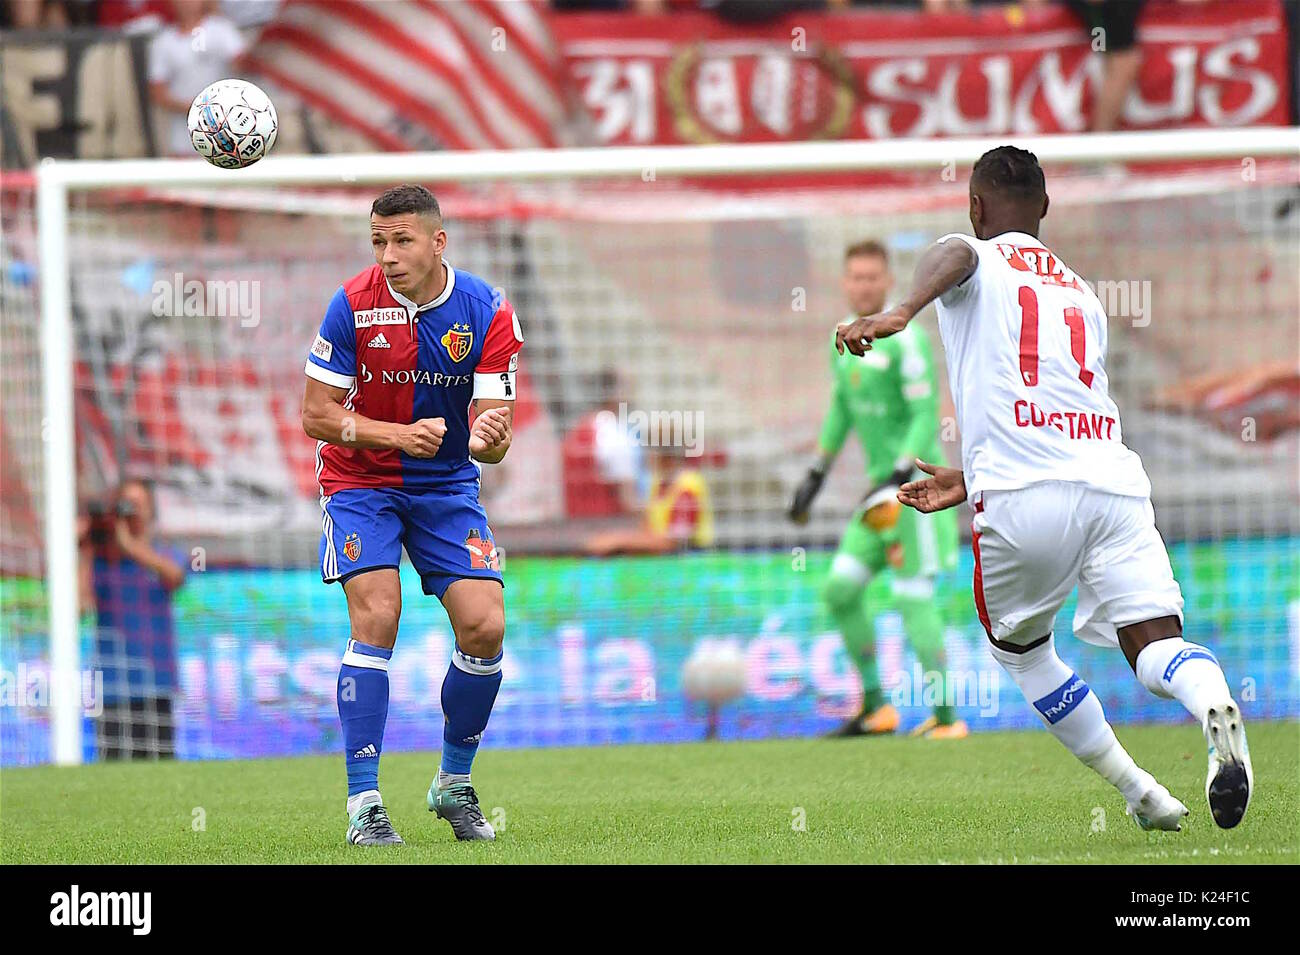 Sion, 27.08.2017, Football Raiffeisen Super League, FC Sion - FC Bale, Kevin Constant (FC Sion 11) duel with Marek Suchy (FCB 17) Photo: Cronos/Frederic Dubuis Stock Photo